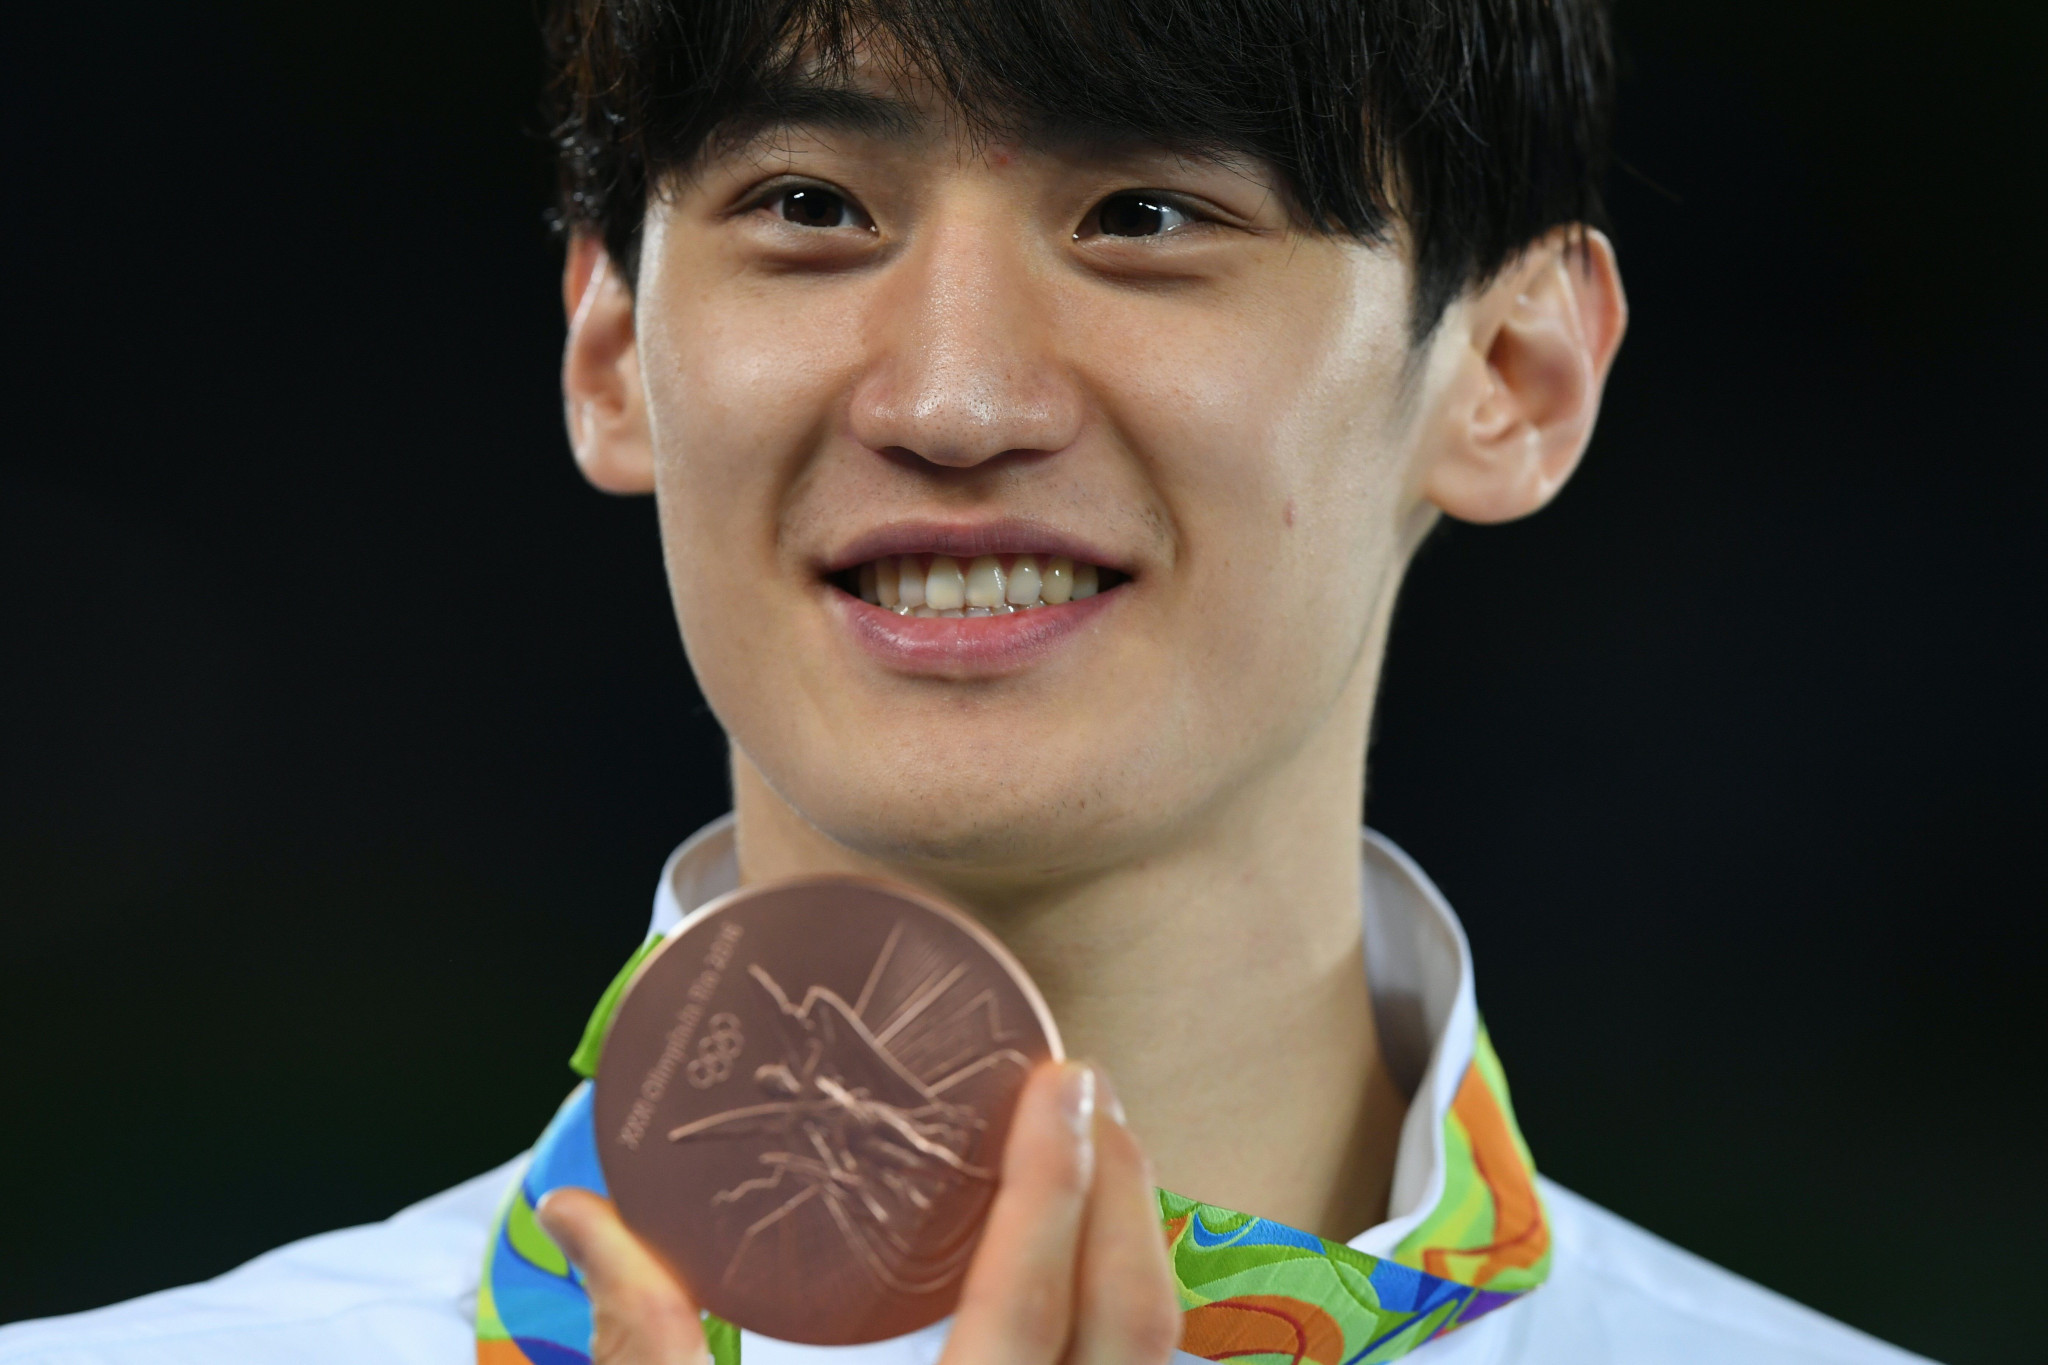 After winning silver and bronze, Dae-hoon Lee has his sights set on Olympic gold ©Getty Images